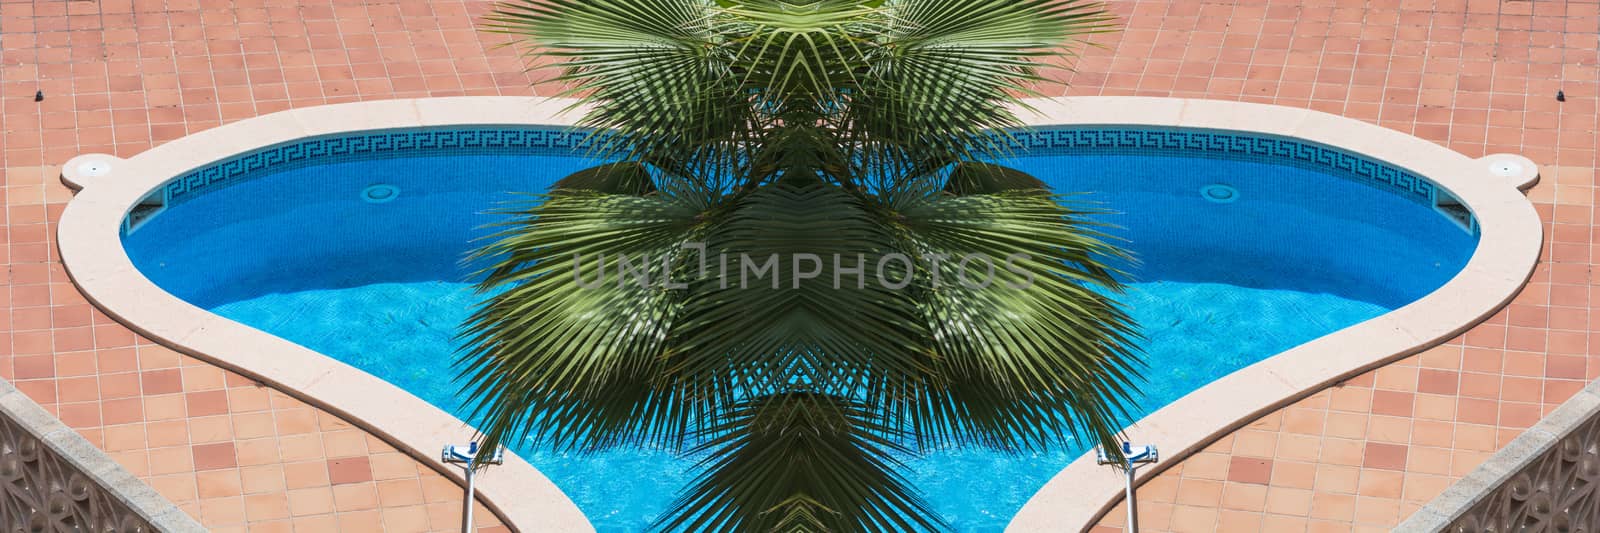 Outdoor swimming pool, whirlpool with blue tiles and palm